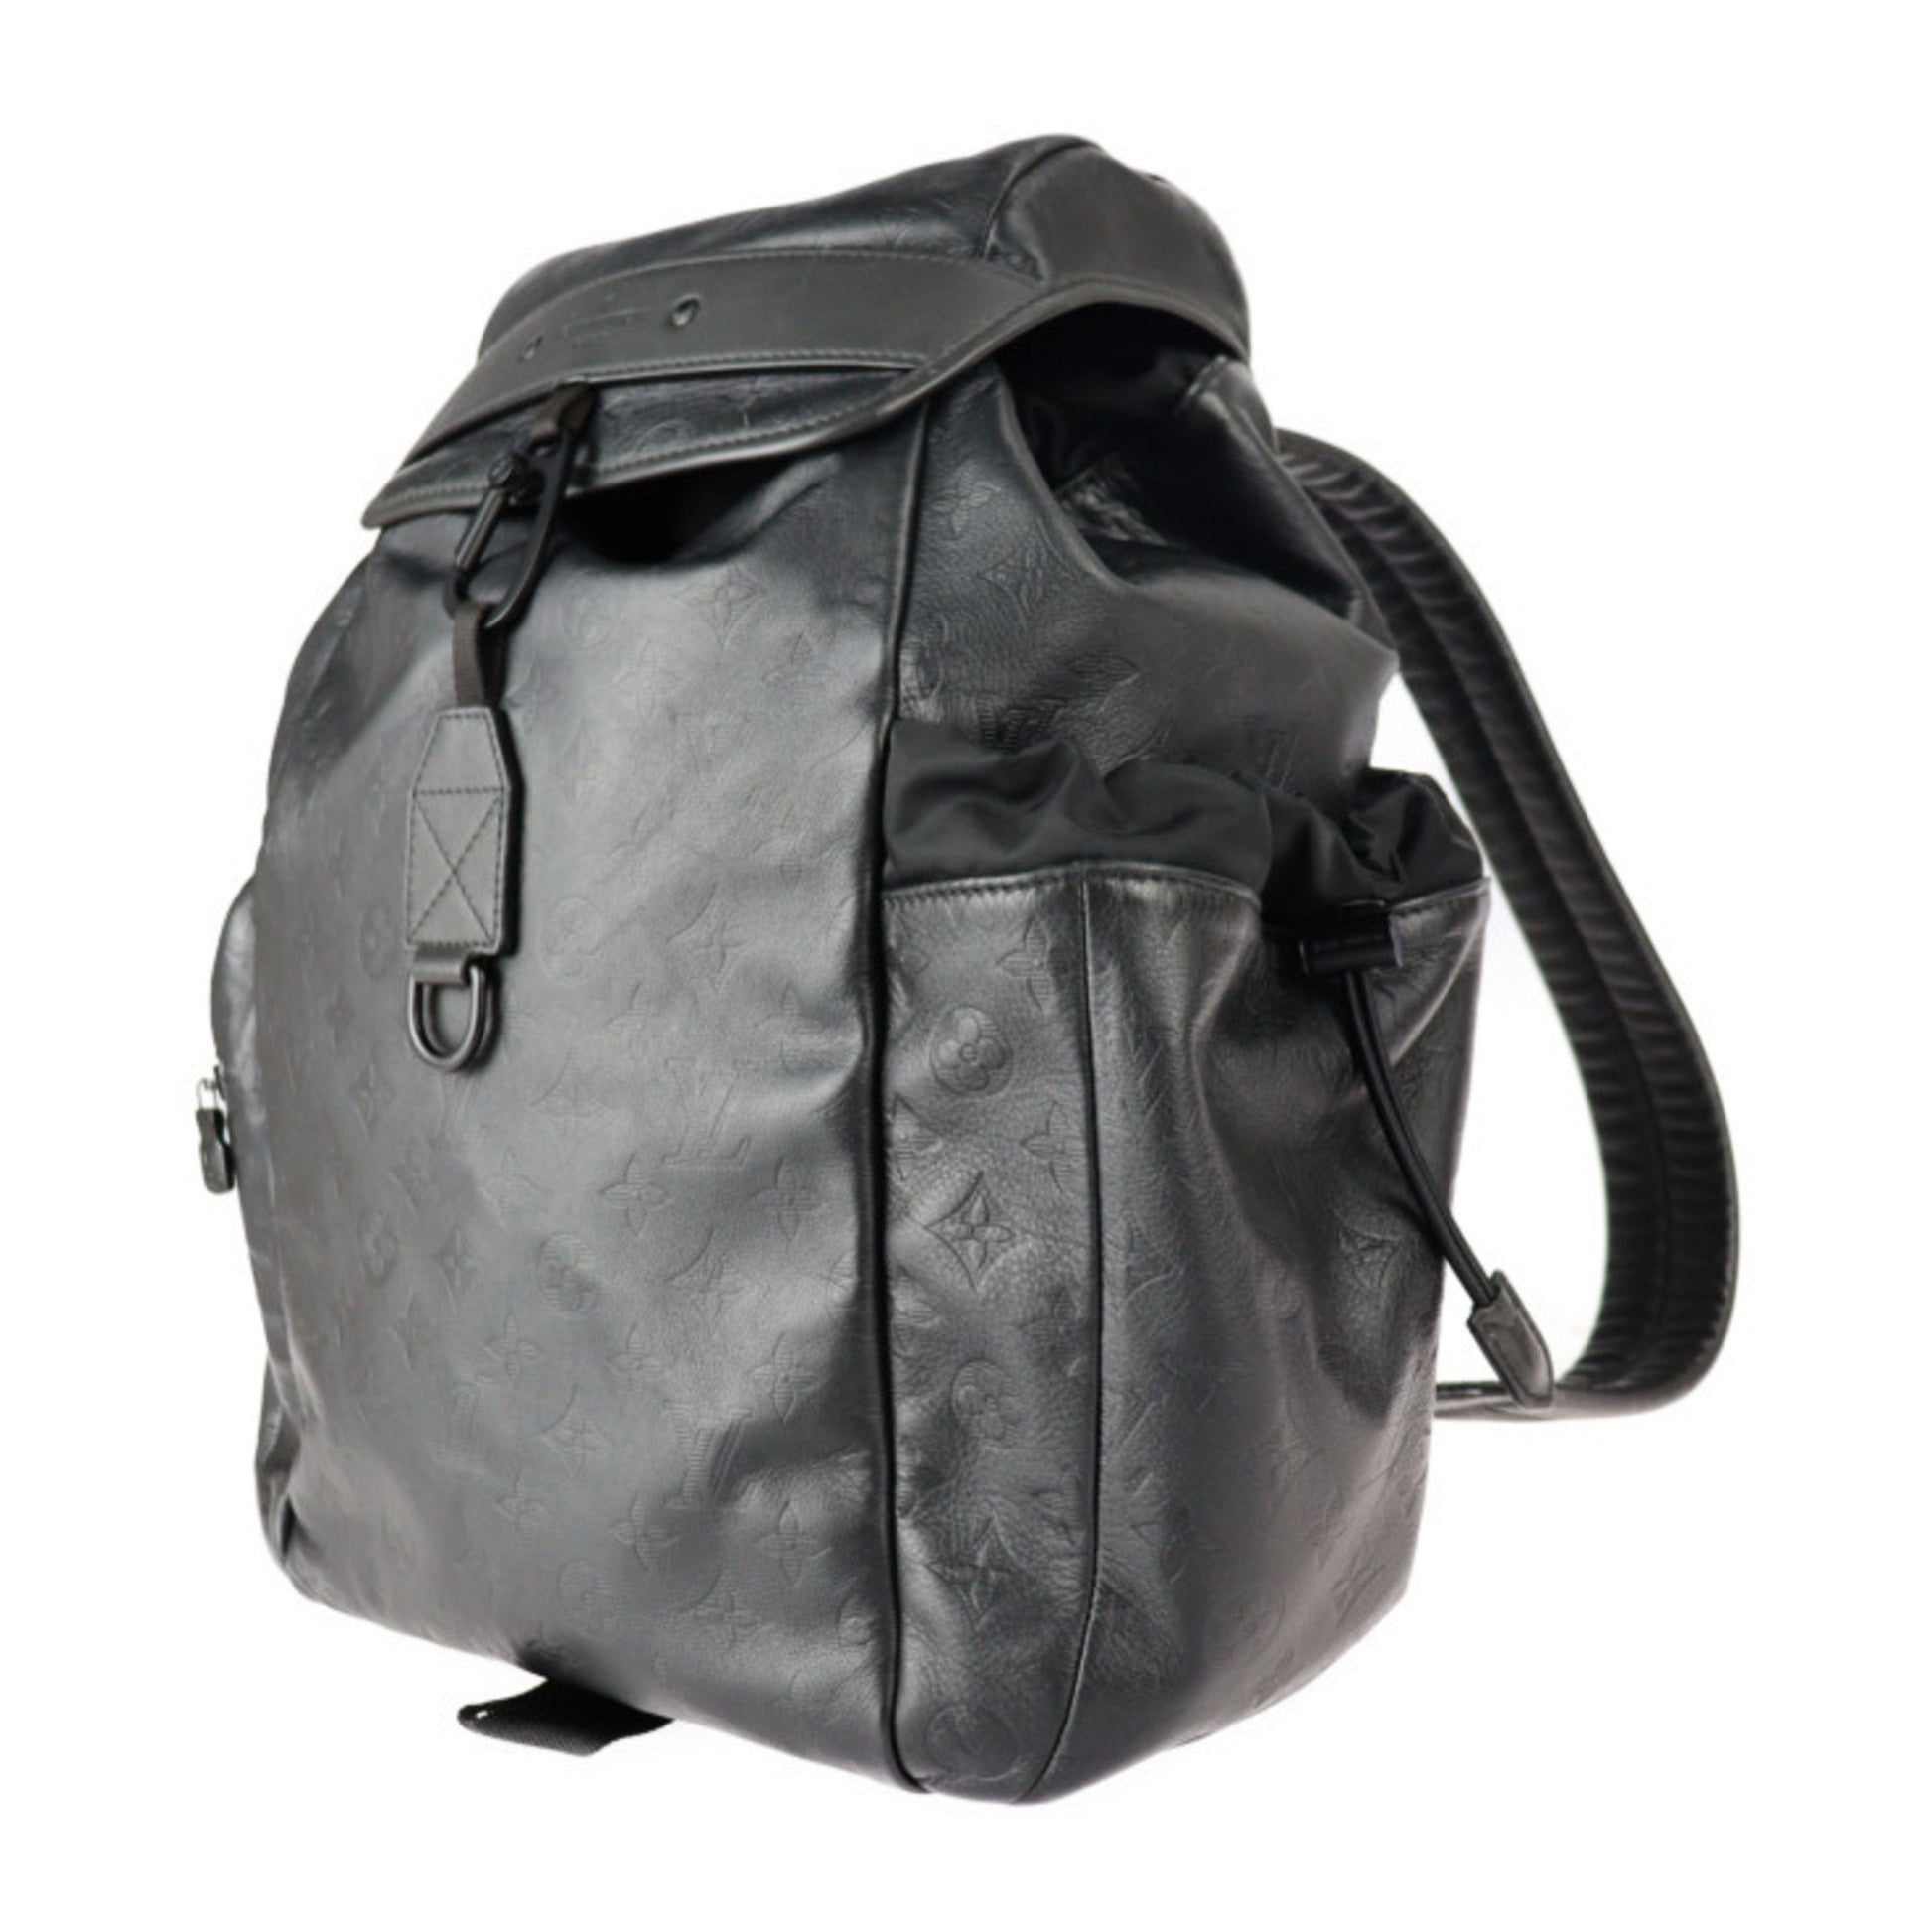 Shop Louis Vuitton Discovery Discovery backpack (M43680) by design◇base